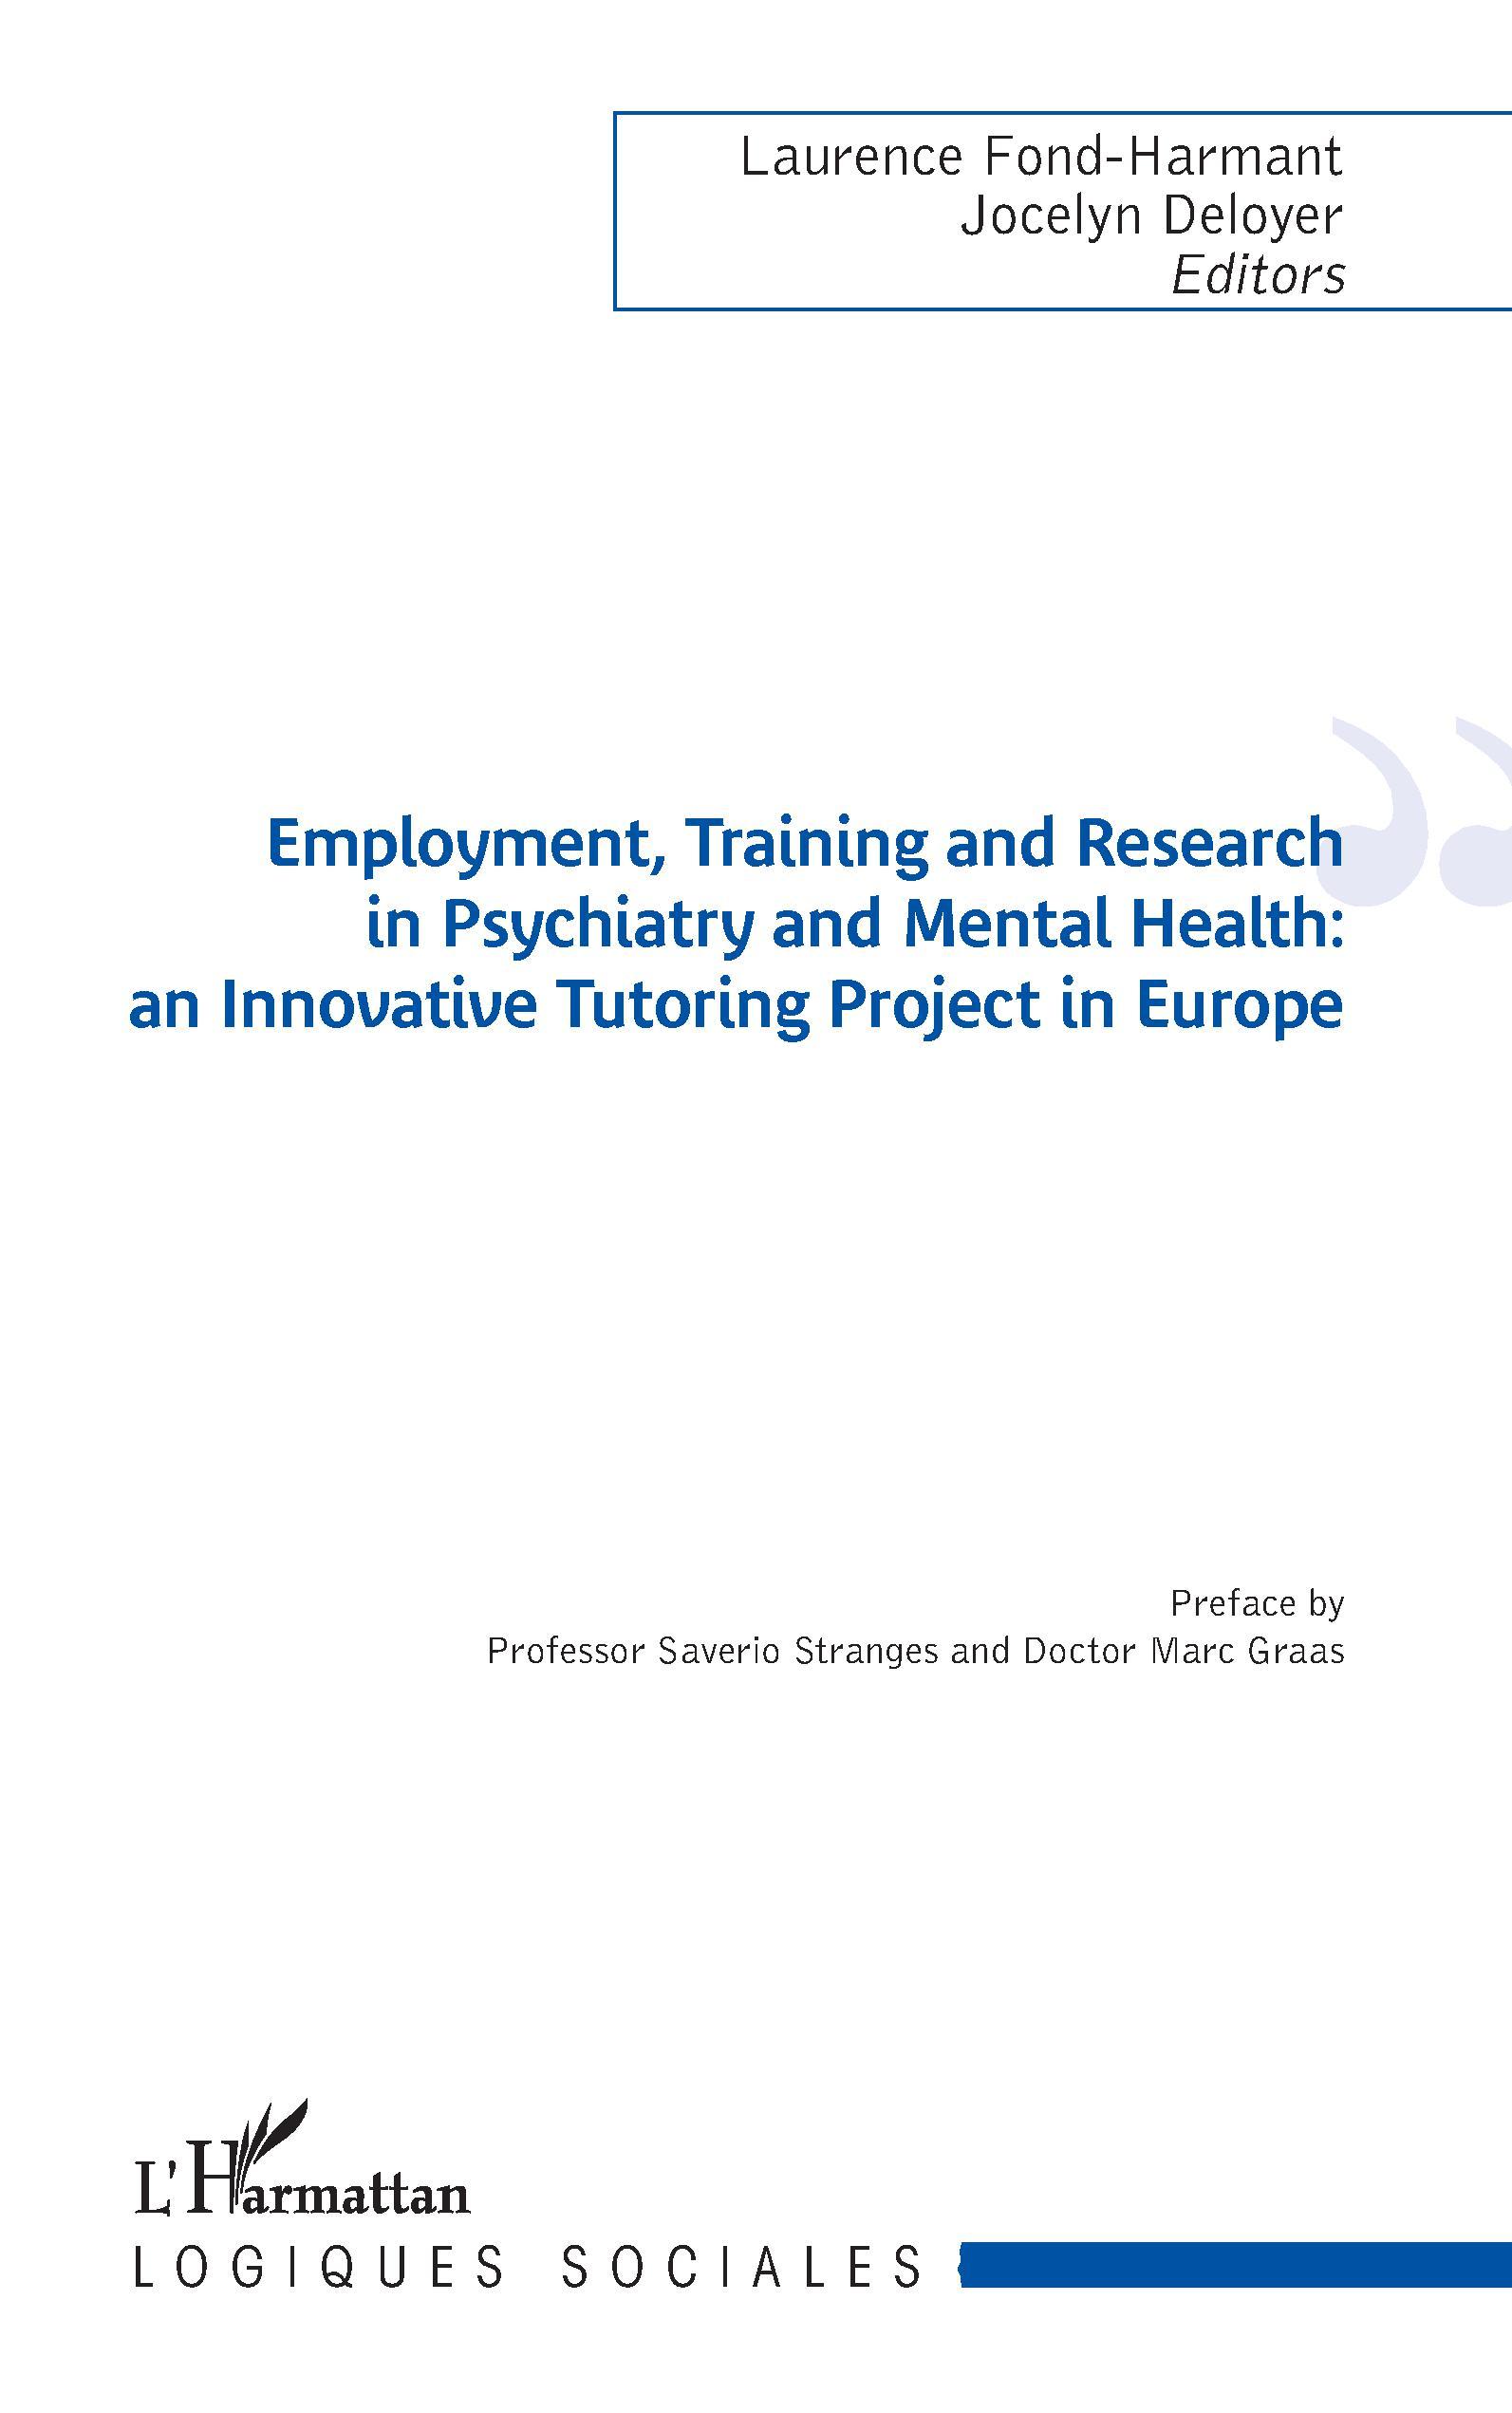 Employment, Training and Research in Psychiatry and Mental Health, an Innovative Tutoring Project in Europe (9782343131276-front-cover)